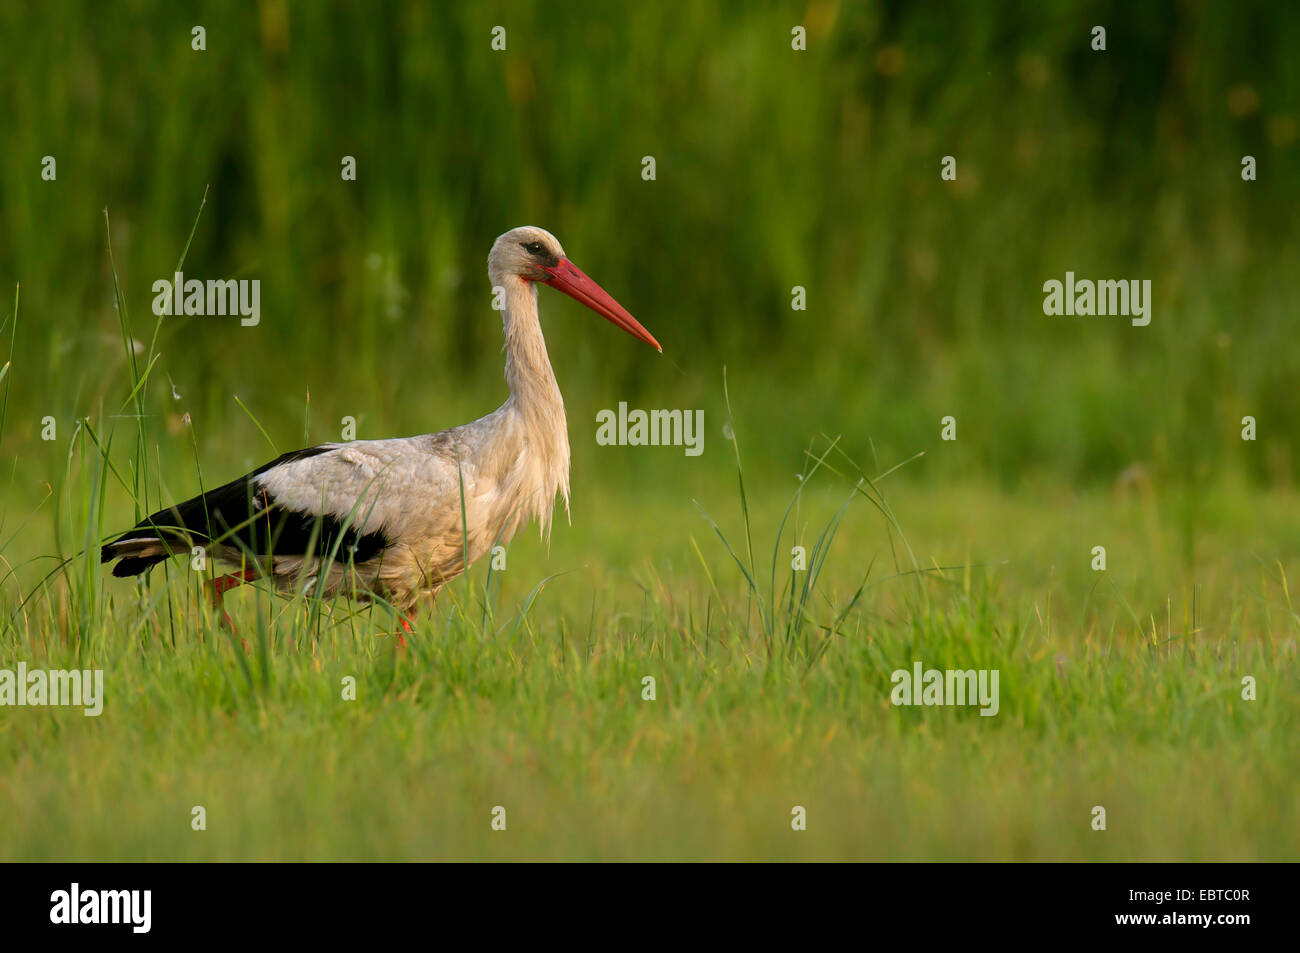 white stork (Ciconia ciconia), on the feed in a meadow, Hungary, Kiskunsagi, Fuellopszallas Stock Photo